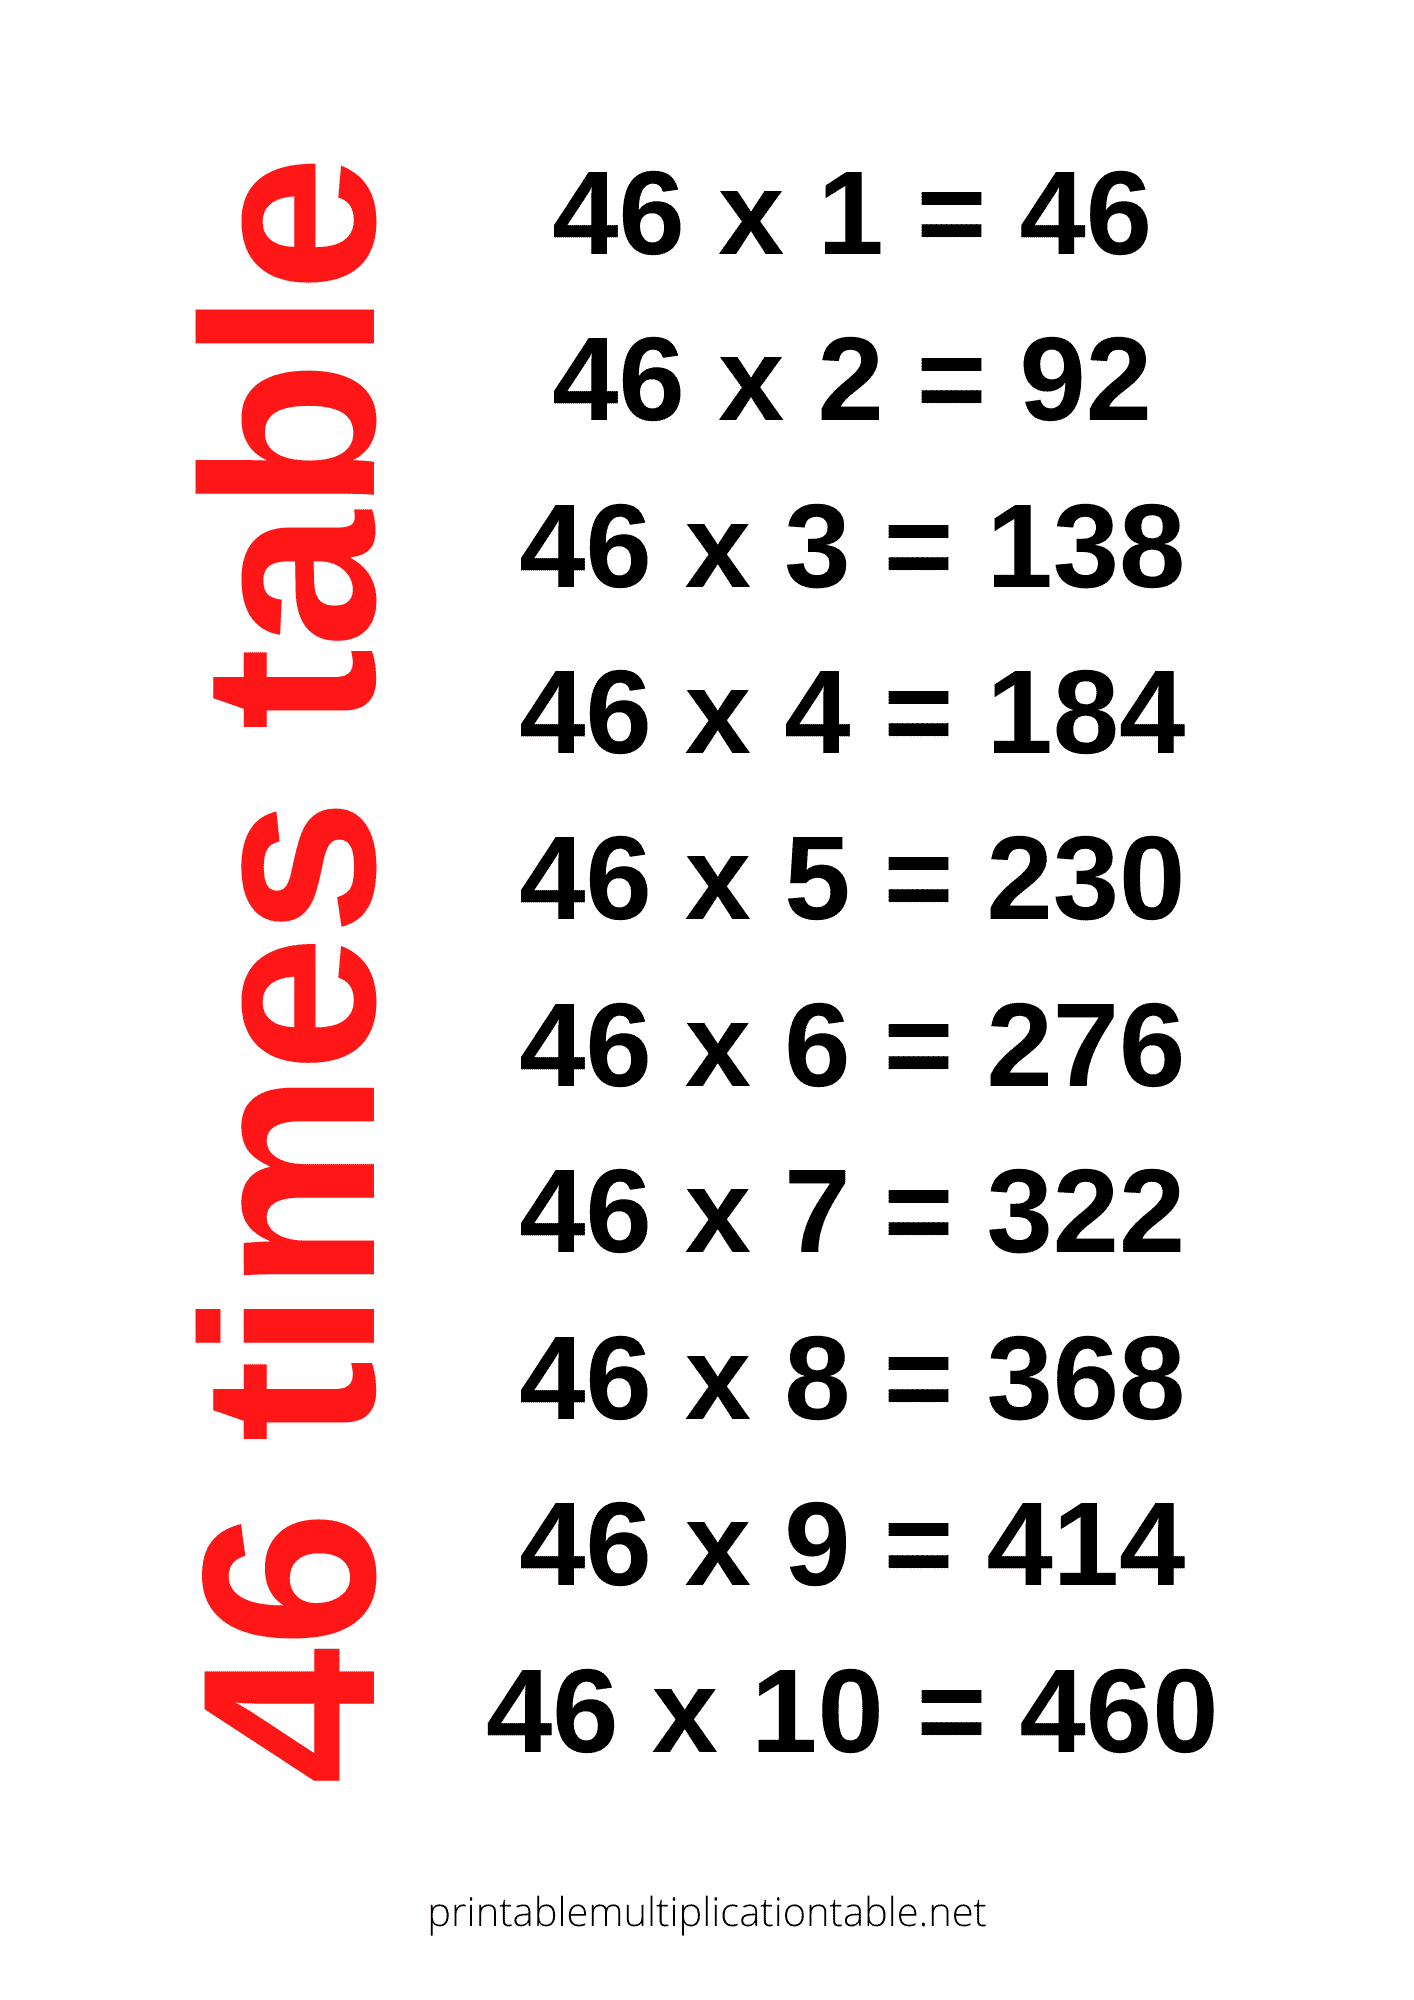 46 times table chart